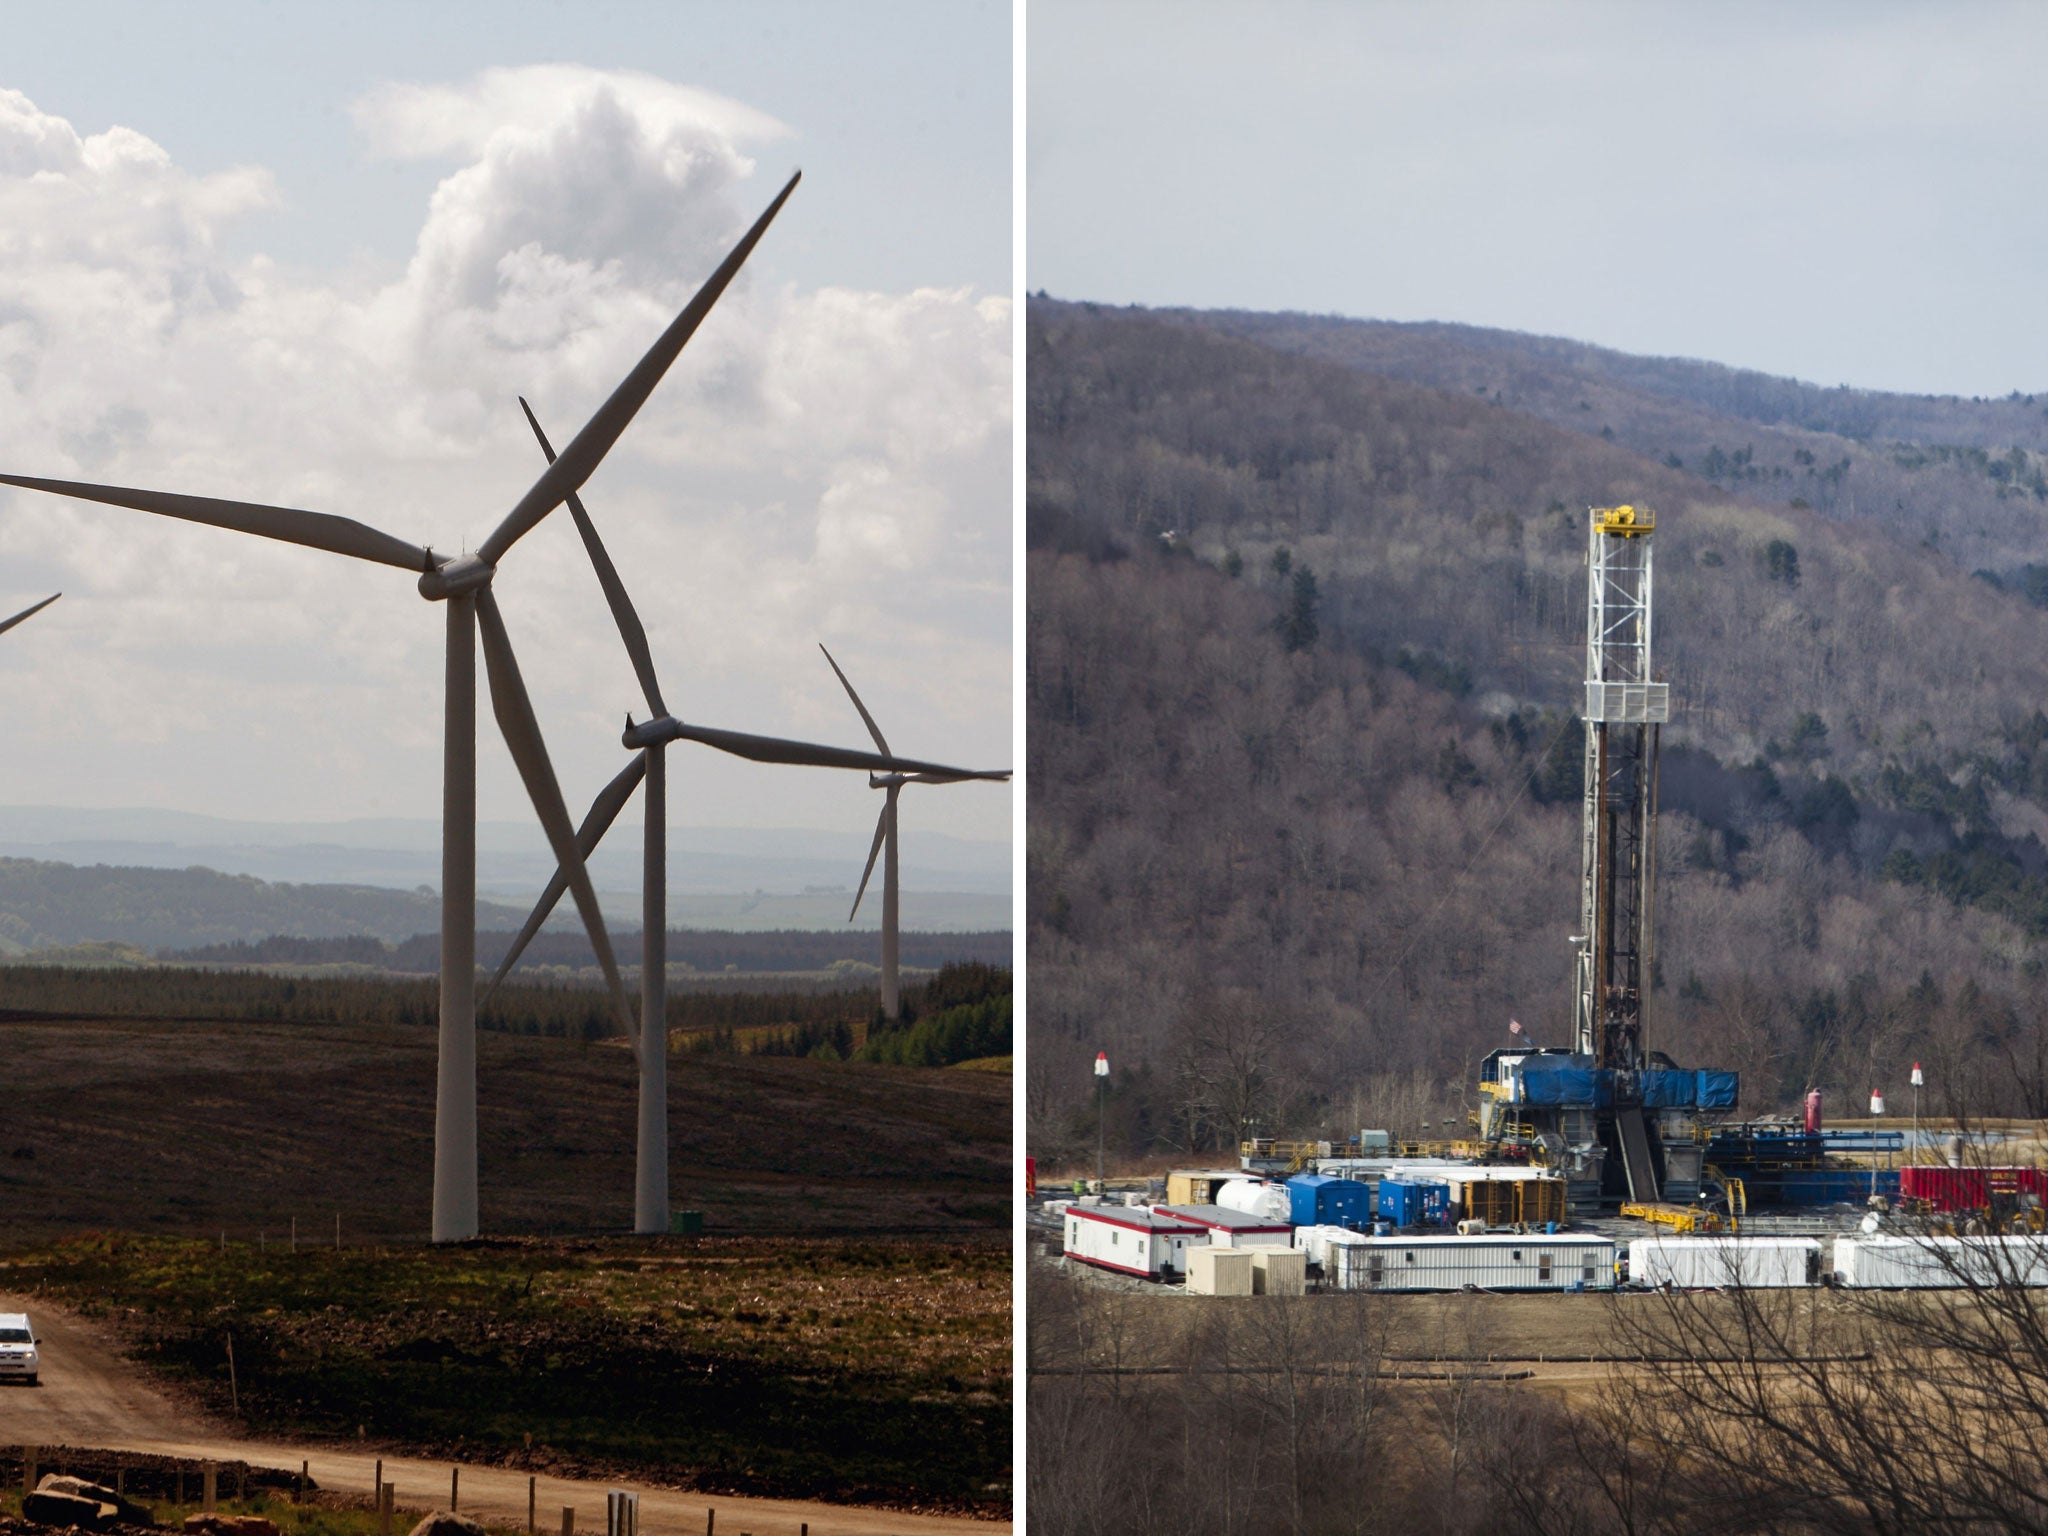 What are the pros and cons of wind farms and fracking?